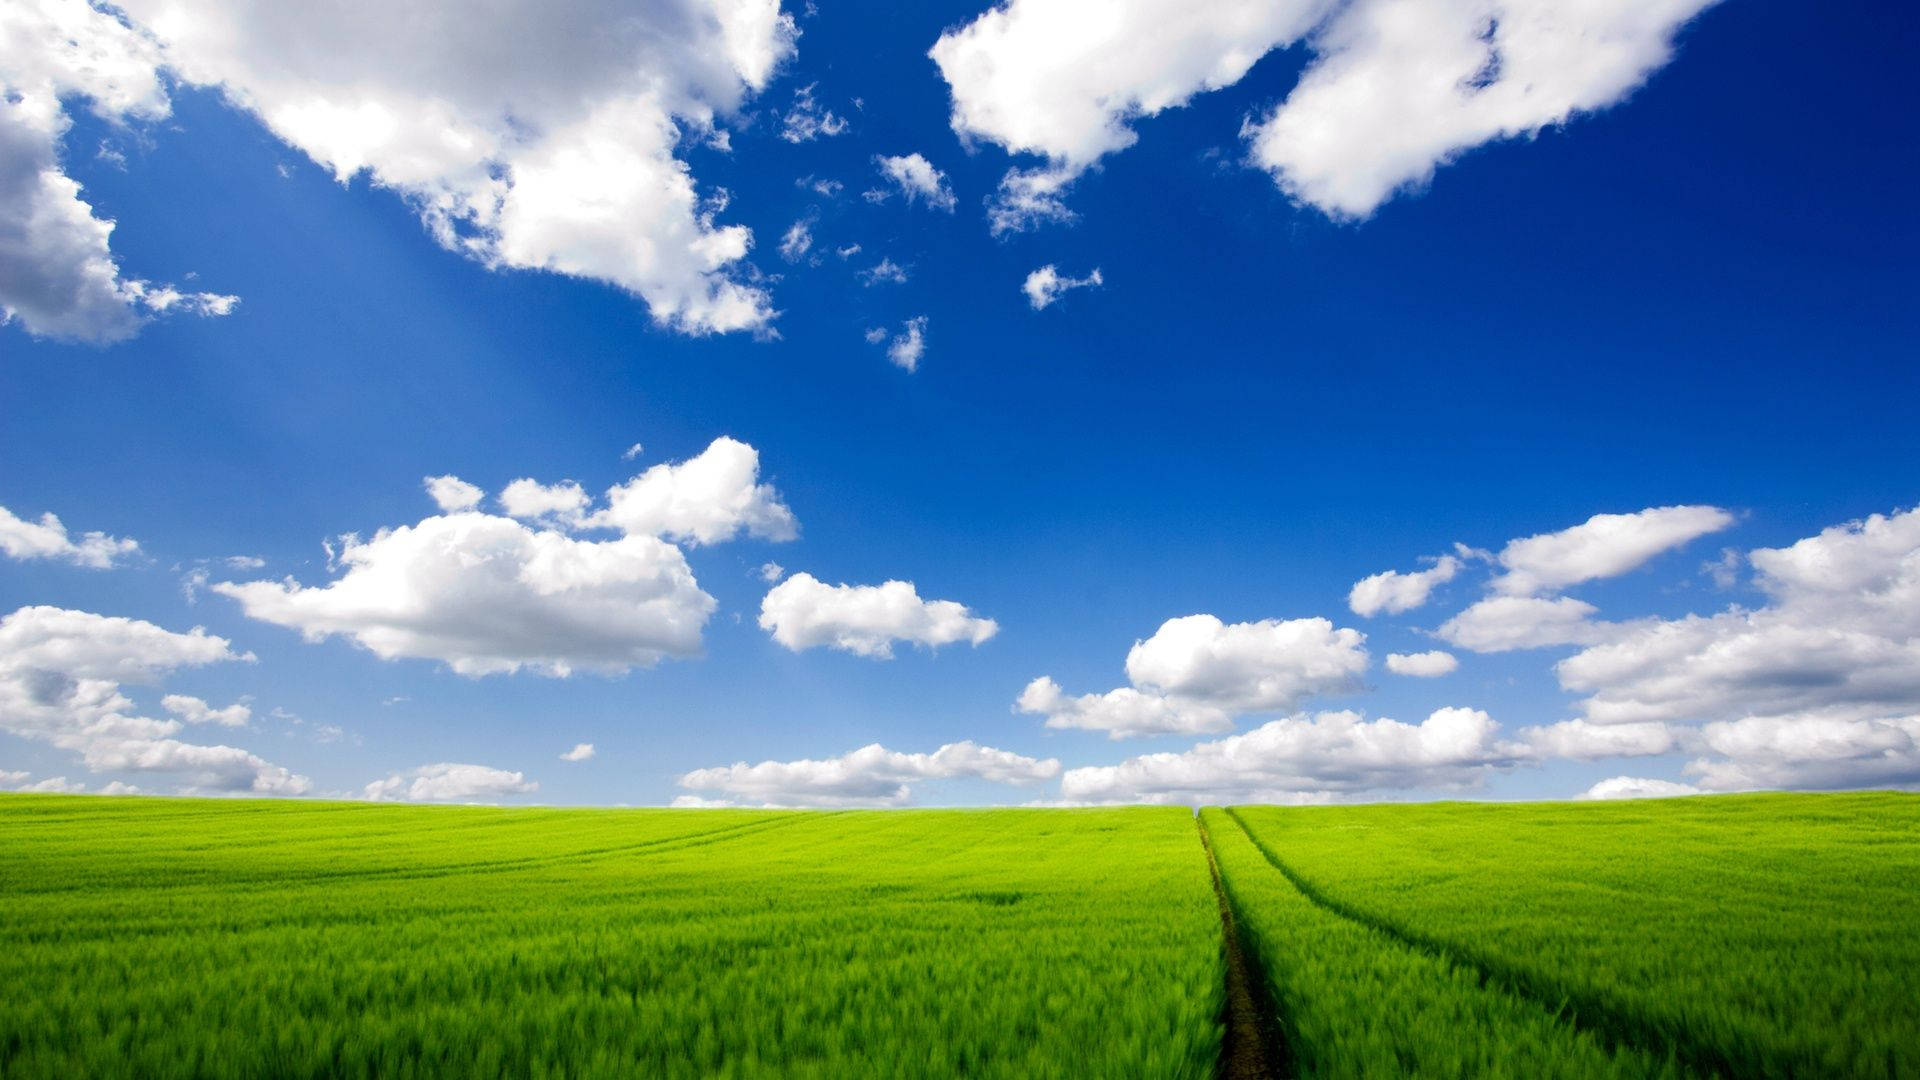 A Green Field With A Path And Clouds In The Sky Background